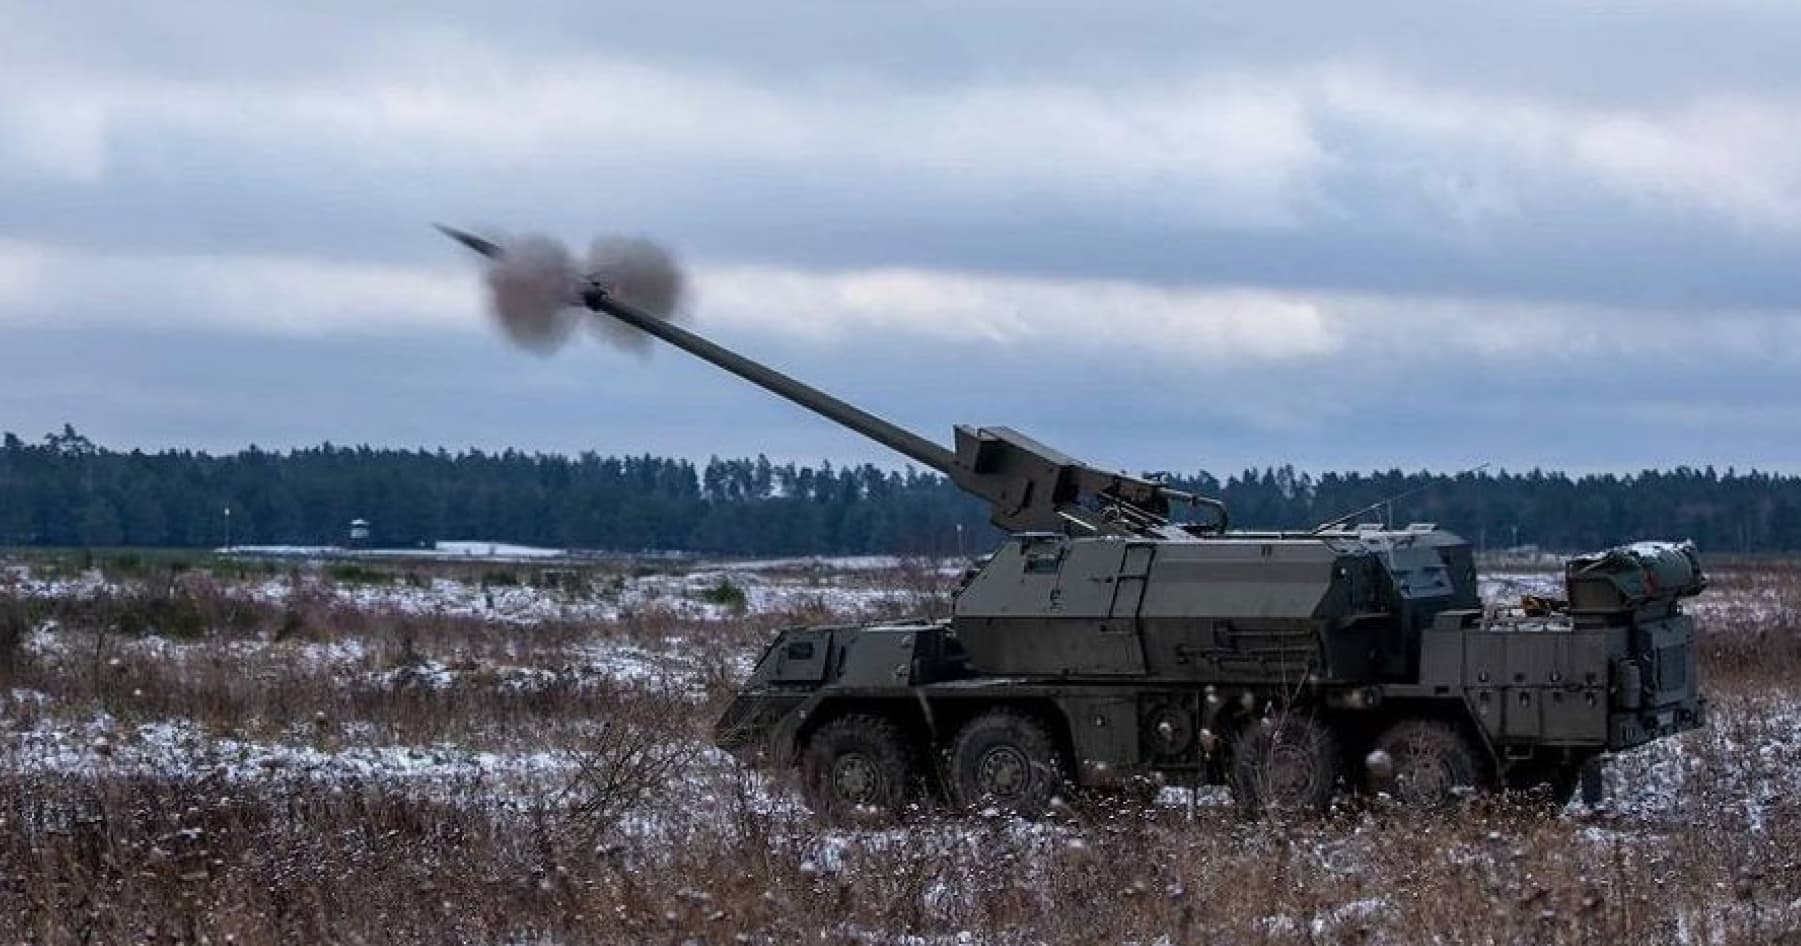 Slovakia handed over two more self-propelled artillery systems Zuzana 2 to Ukraine